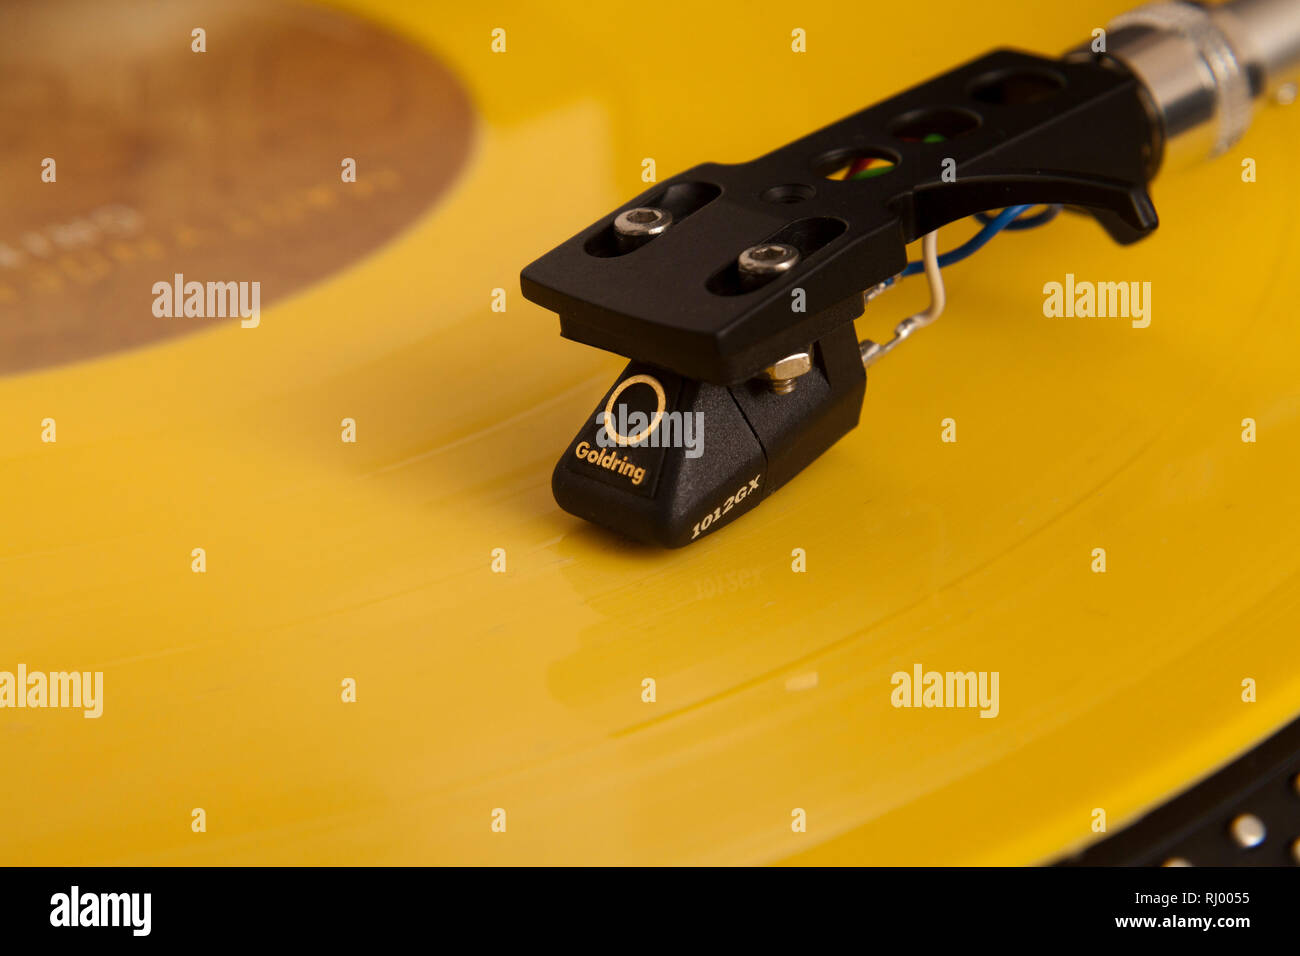 Coloured vinyl record playing on a turntable  Picture by Gary Doak/Alamy Stock Photo